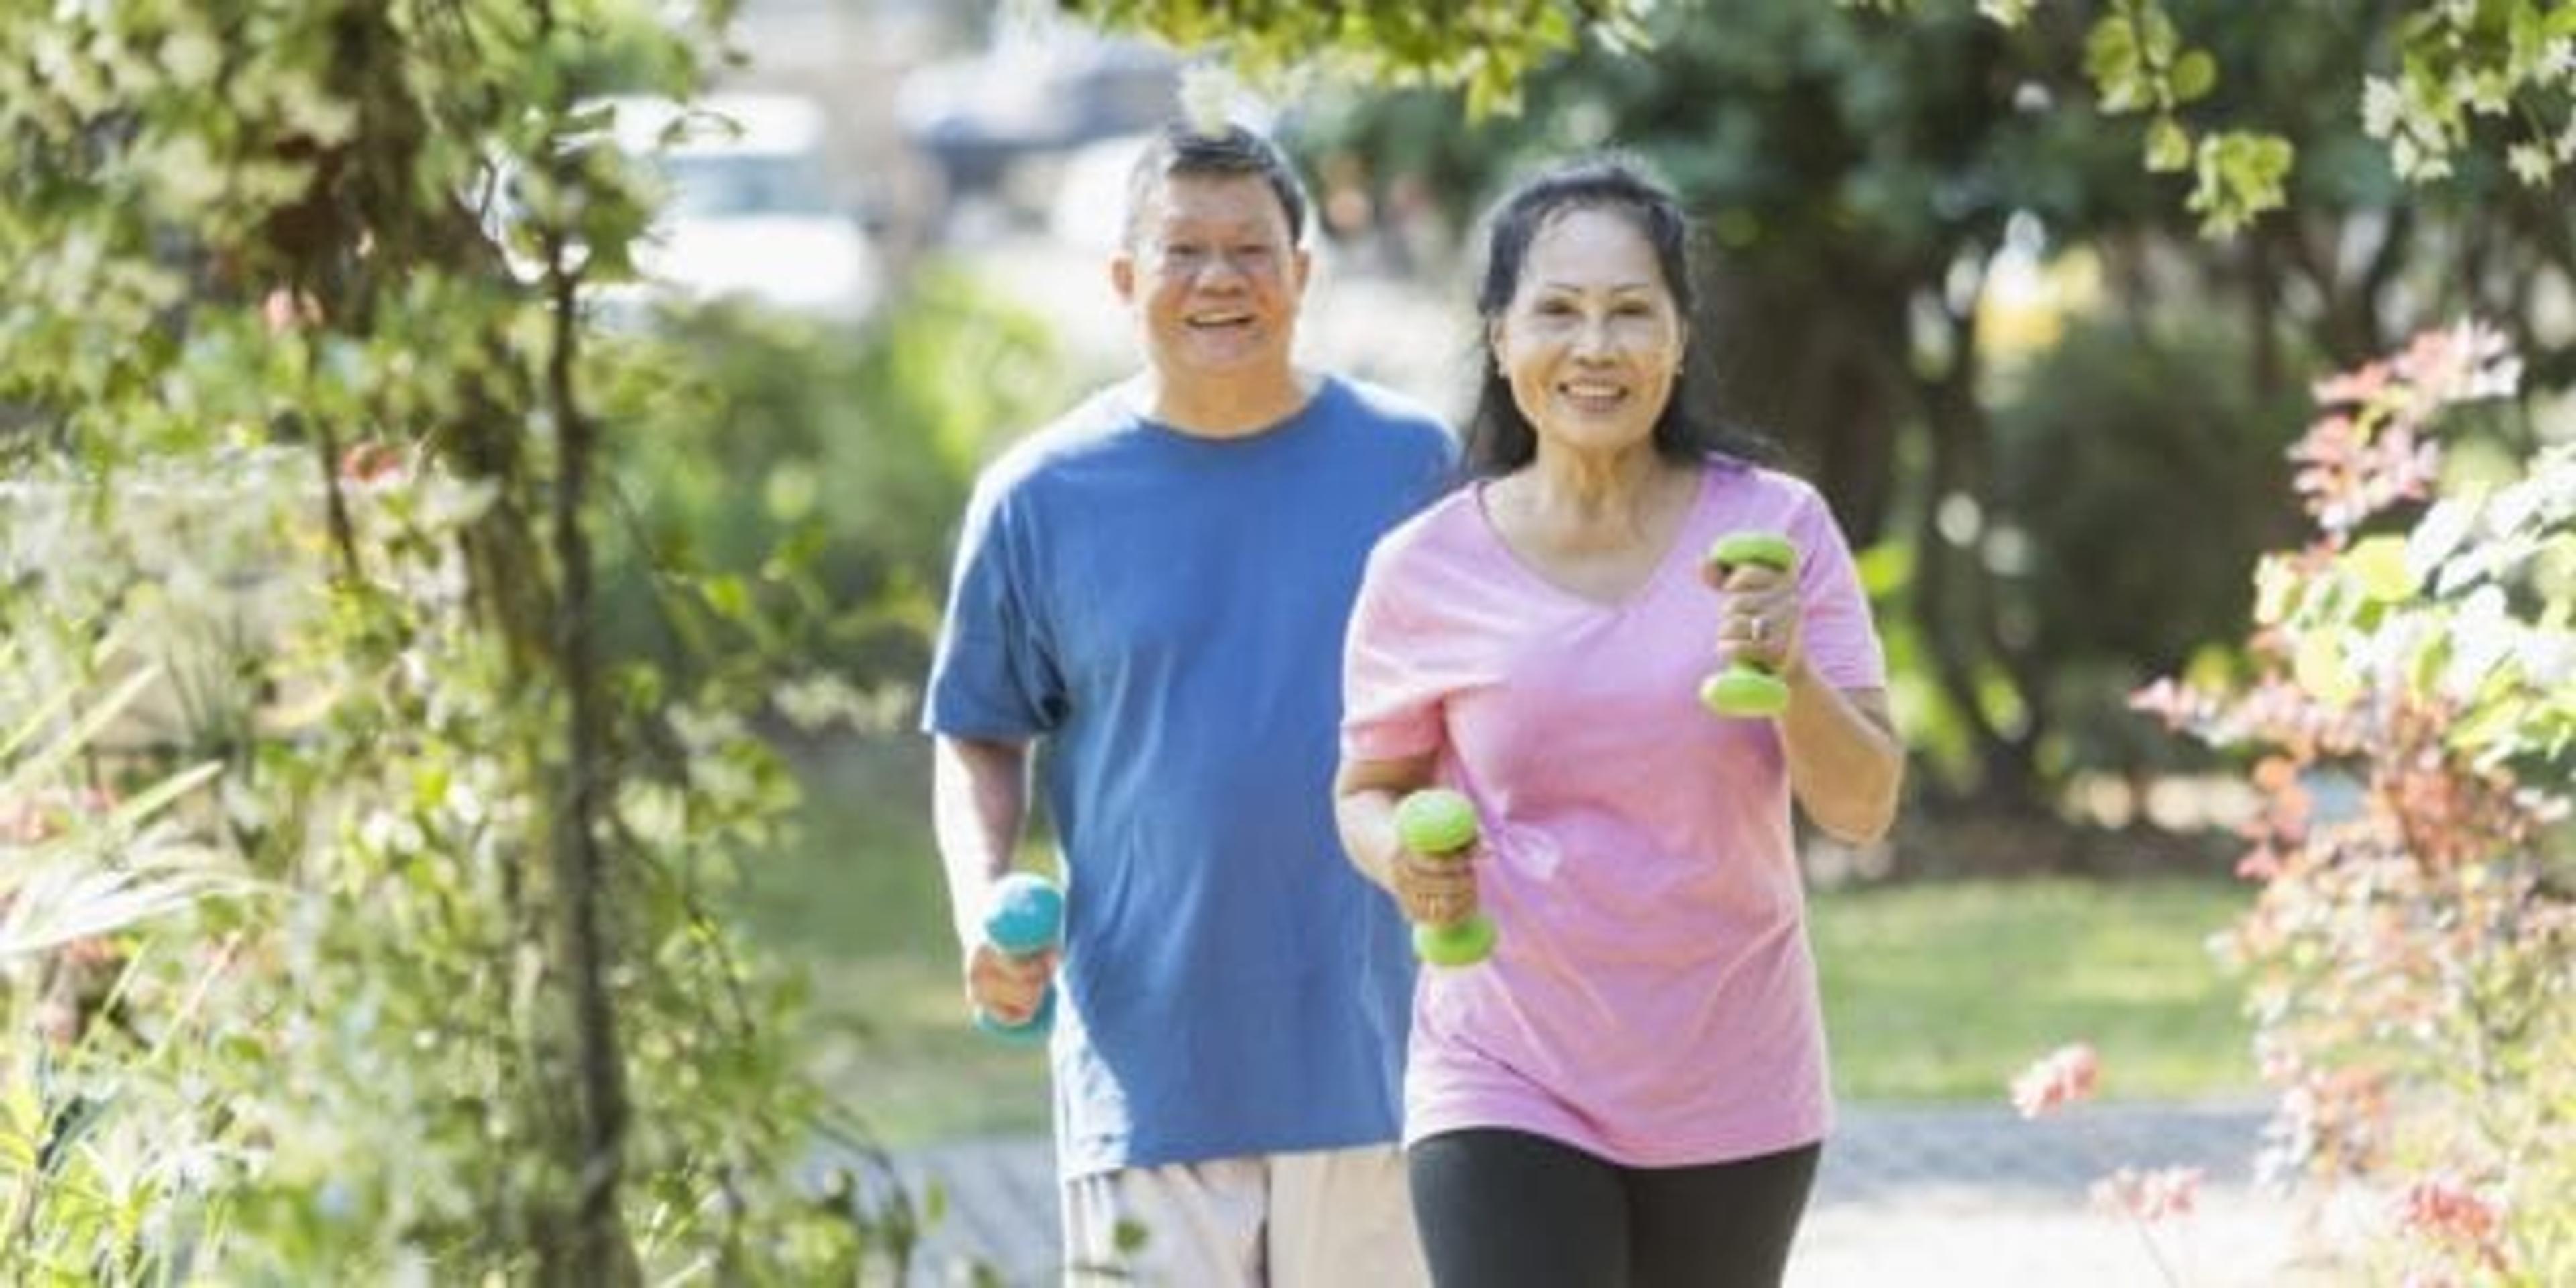 A senior Asian couple in the park on a sunny day, exercising together. They are powerwalking or jogging with dumbbells in their hands.